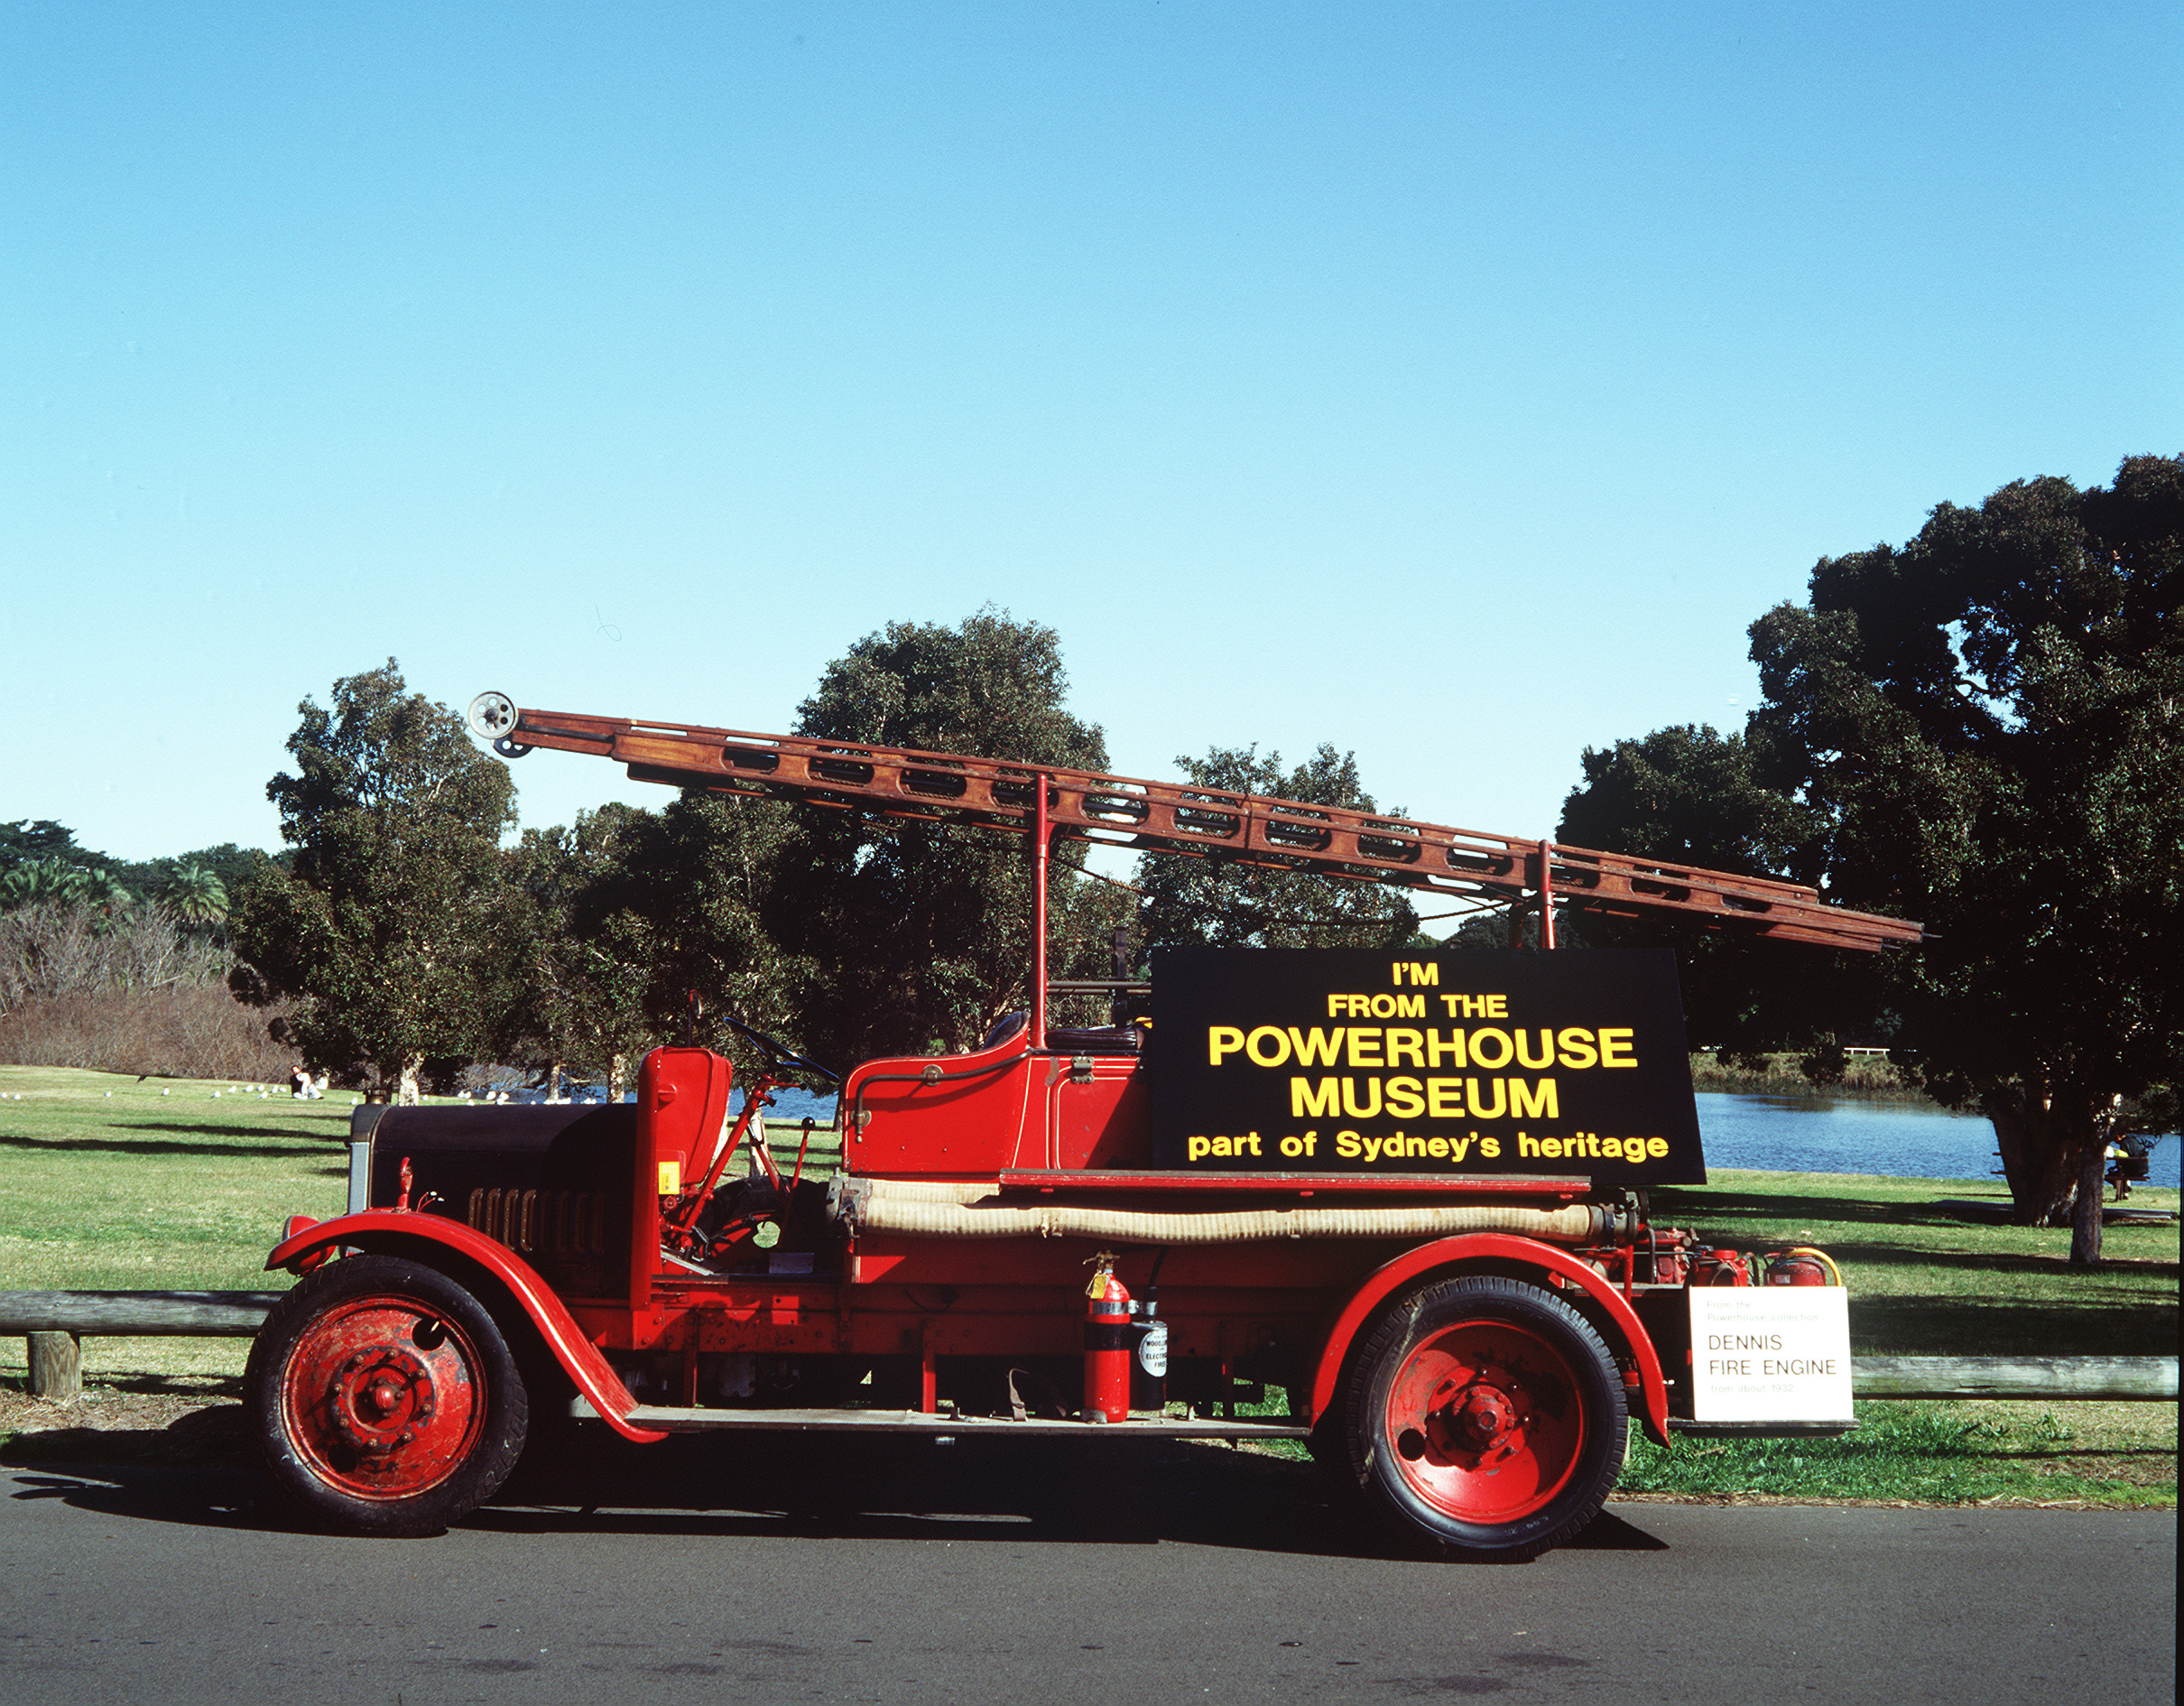 Dennis-Tamini fire engine used in NSW fire stations